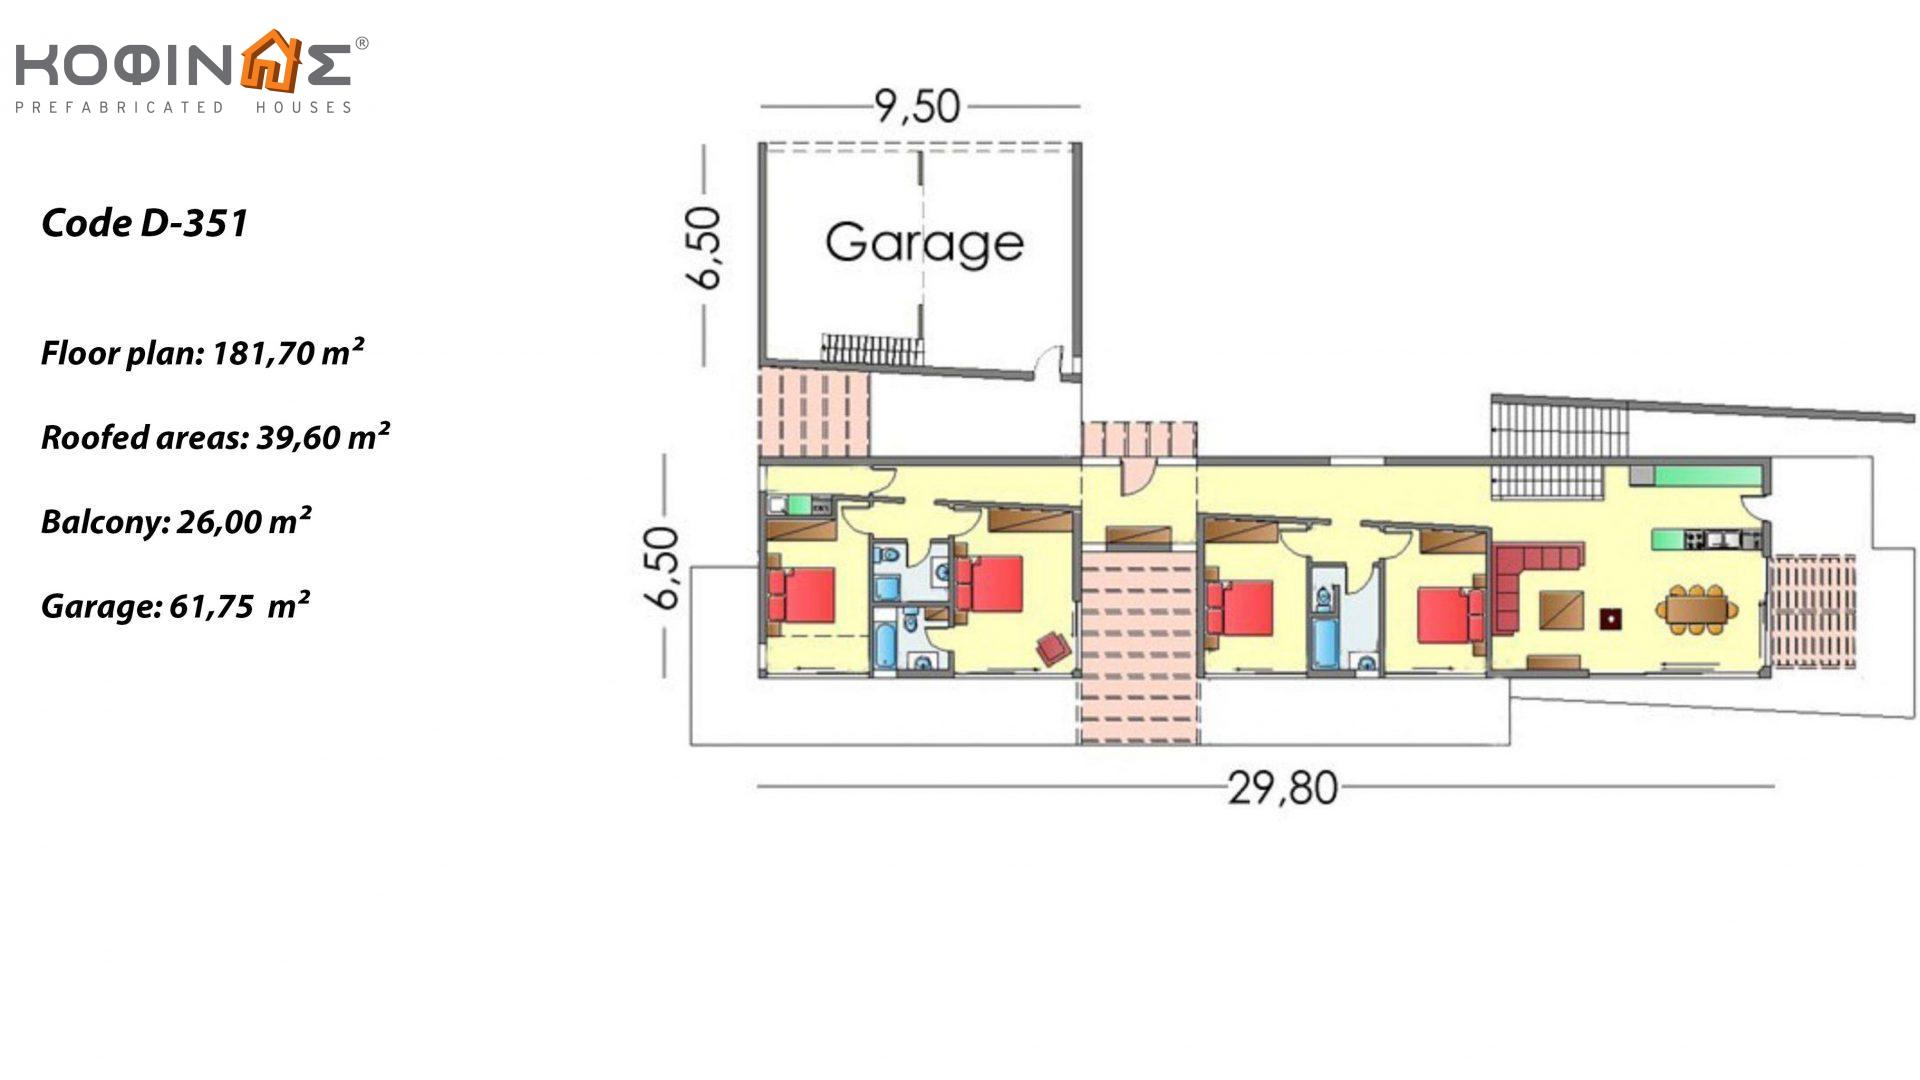 2-story house D-351, total surface of 351,80 m² , +Garage 61.75 m²(=413.55 m²),covered roofed areas 57.6 m²,balconies 26.00 m²